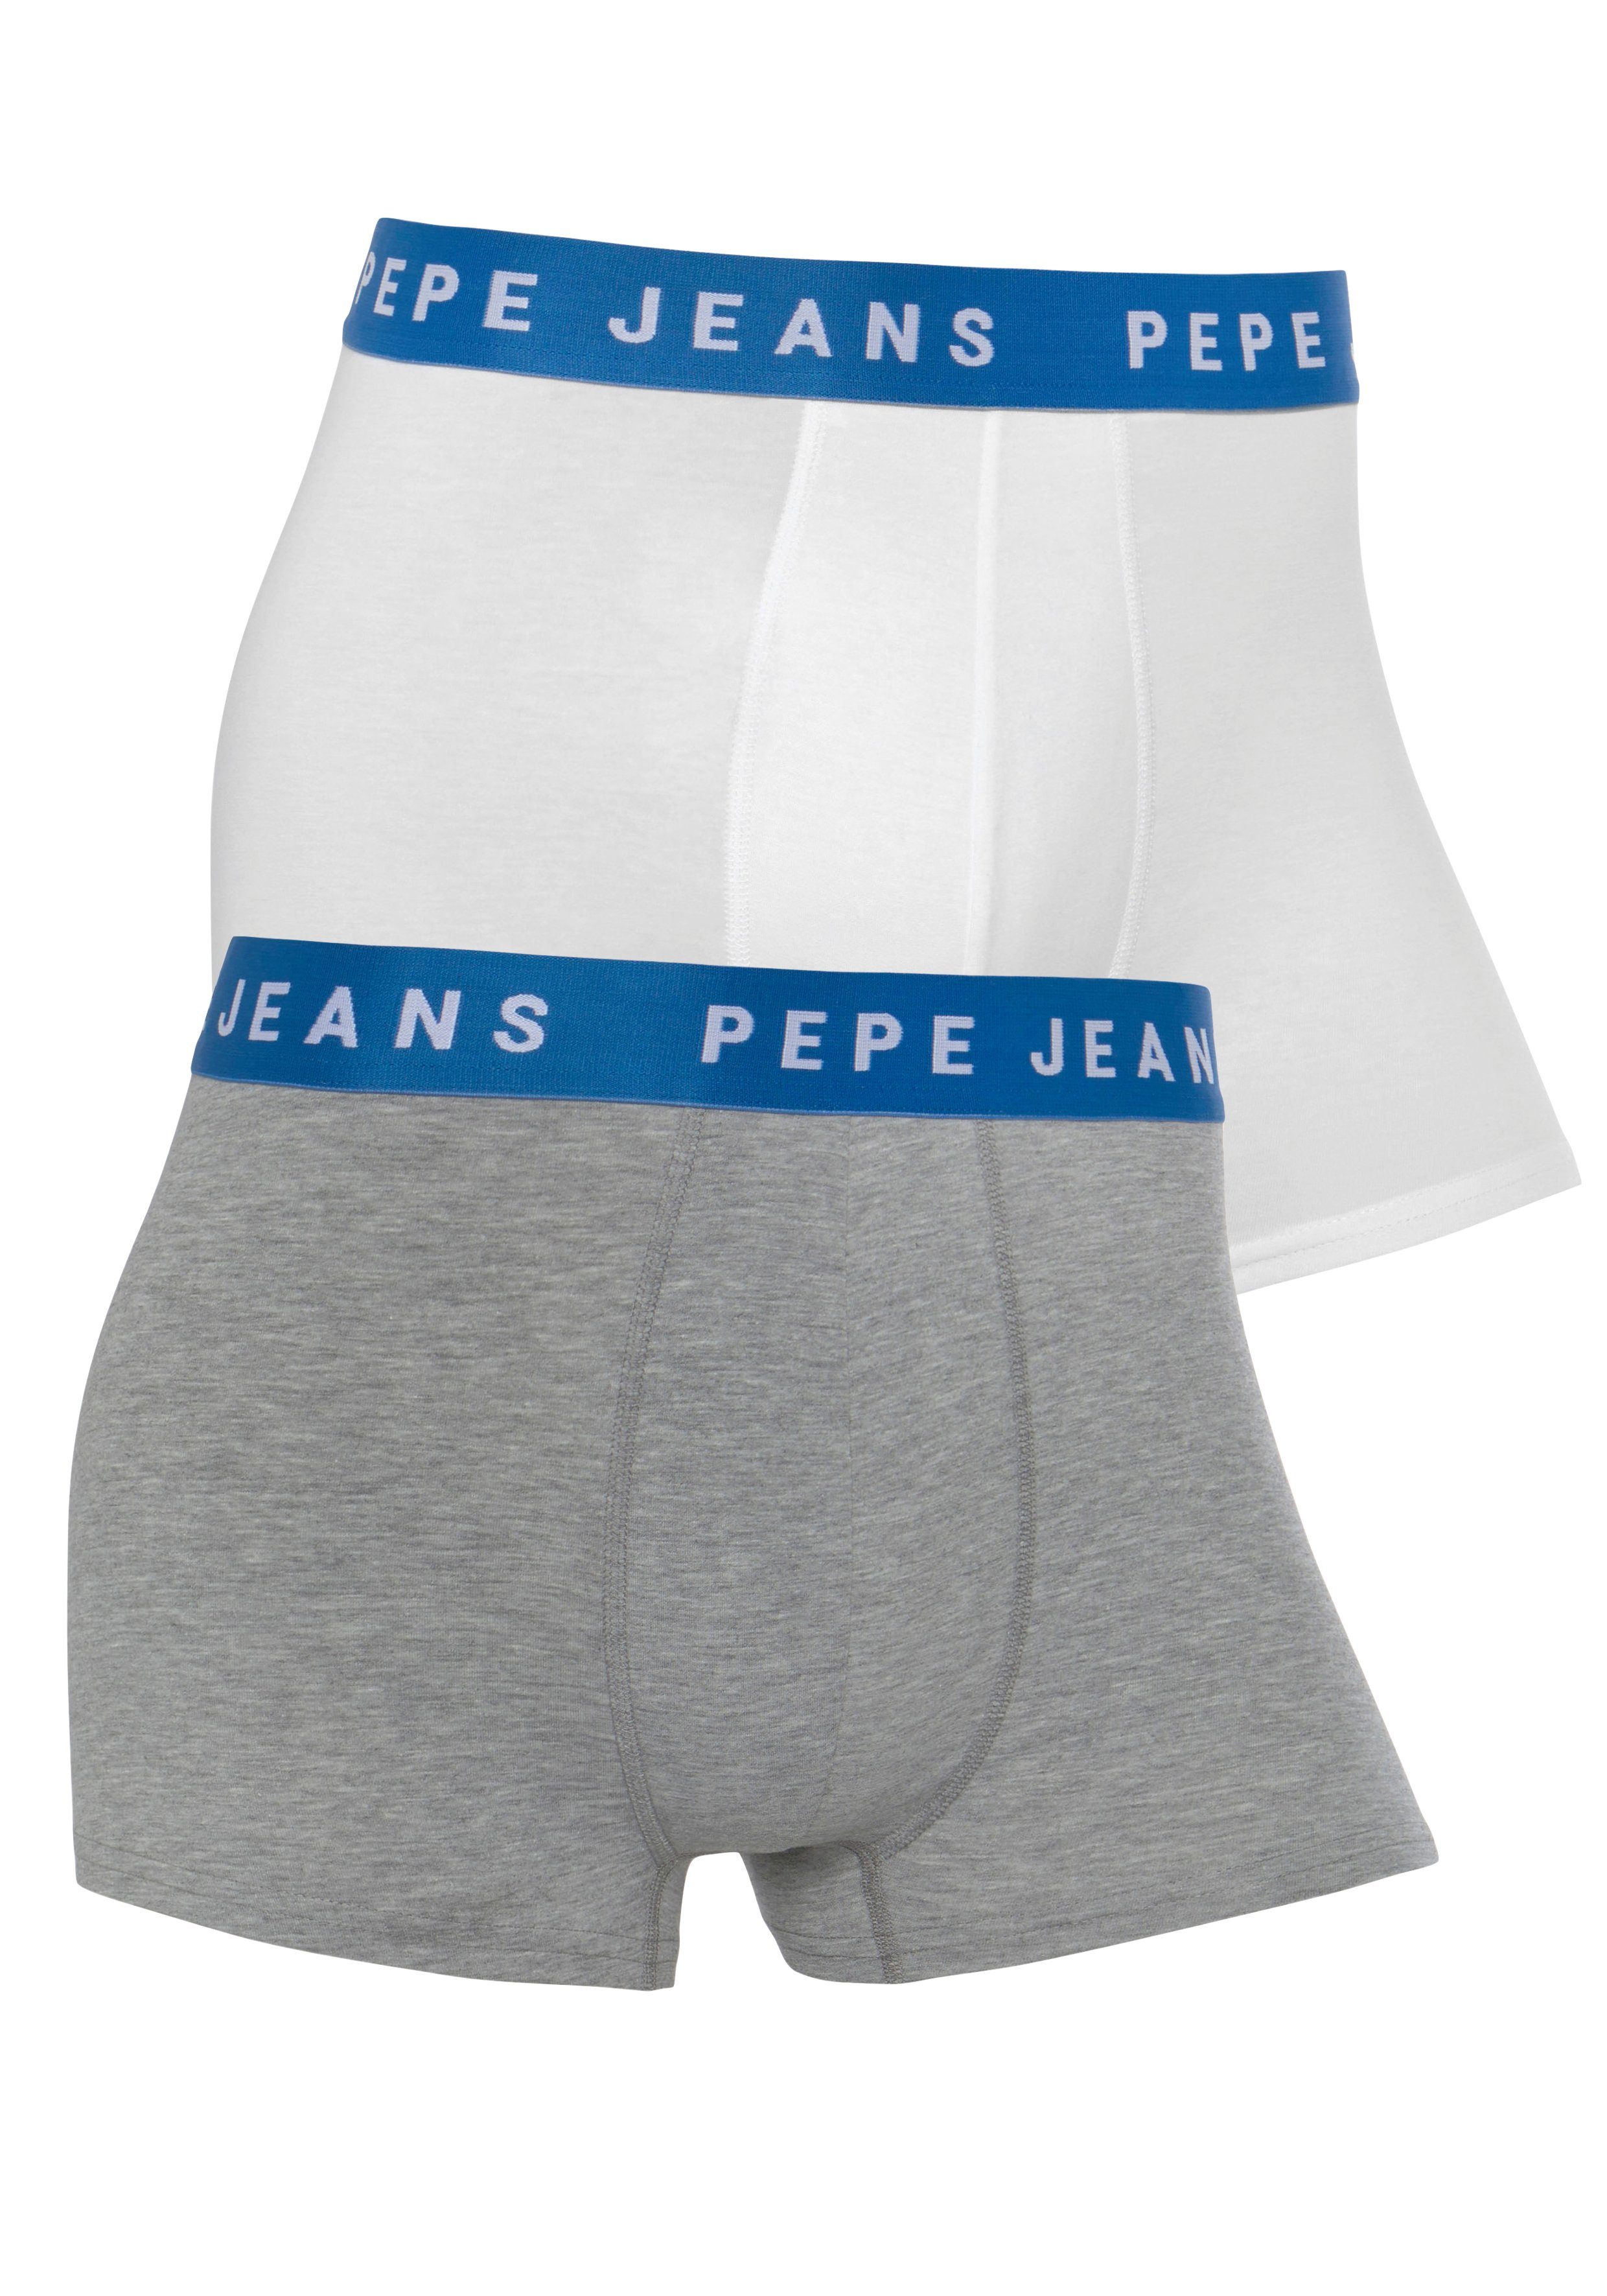 Pepe Jeans Boxer (Packung, 2-St) enganliegend grau + weiß